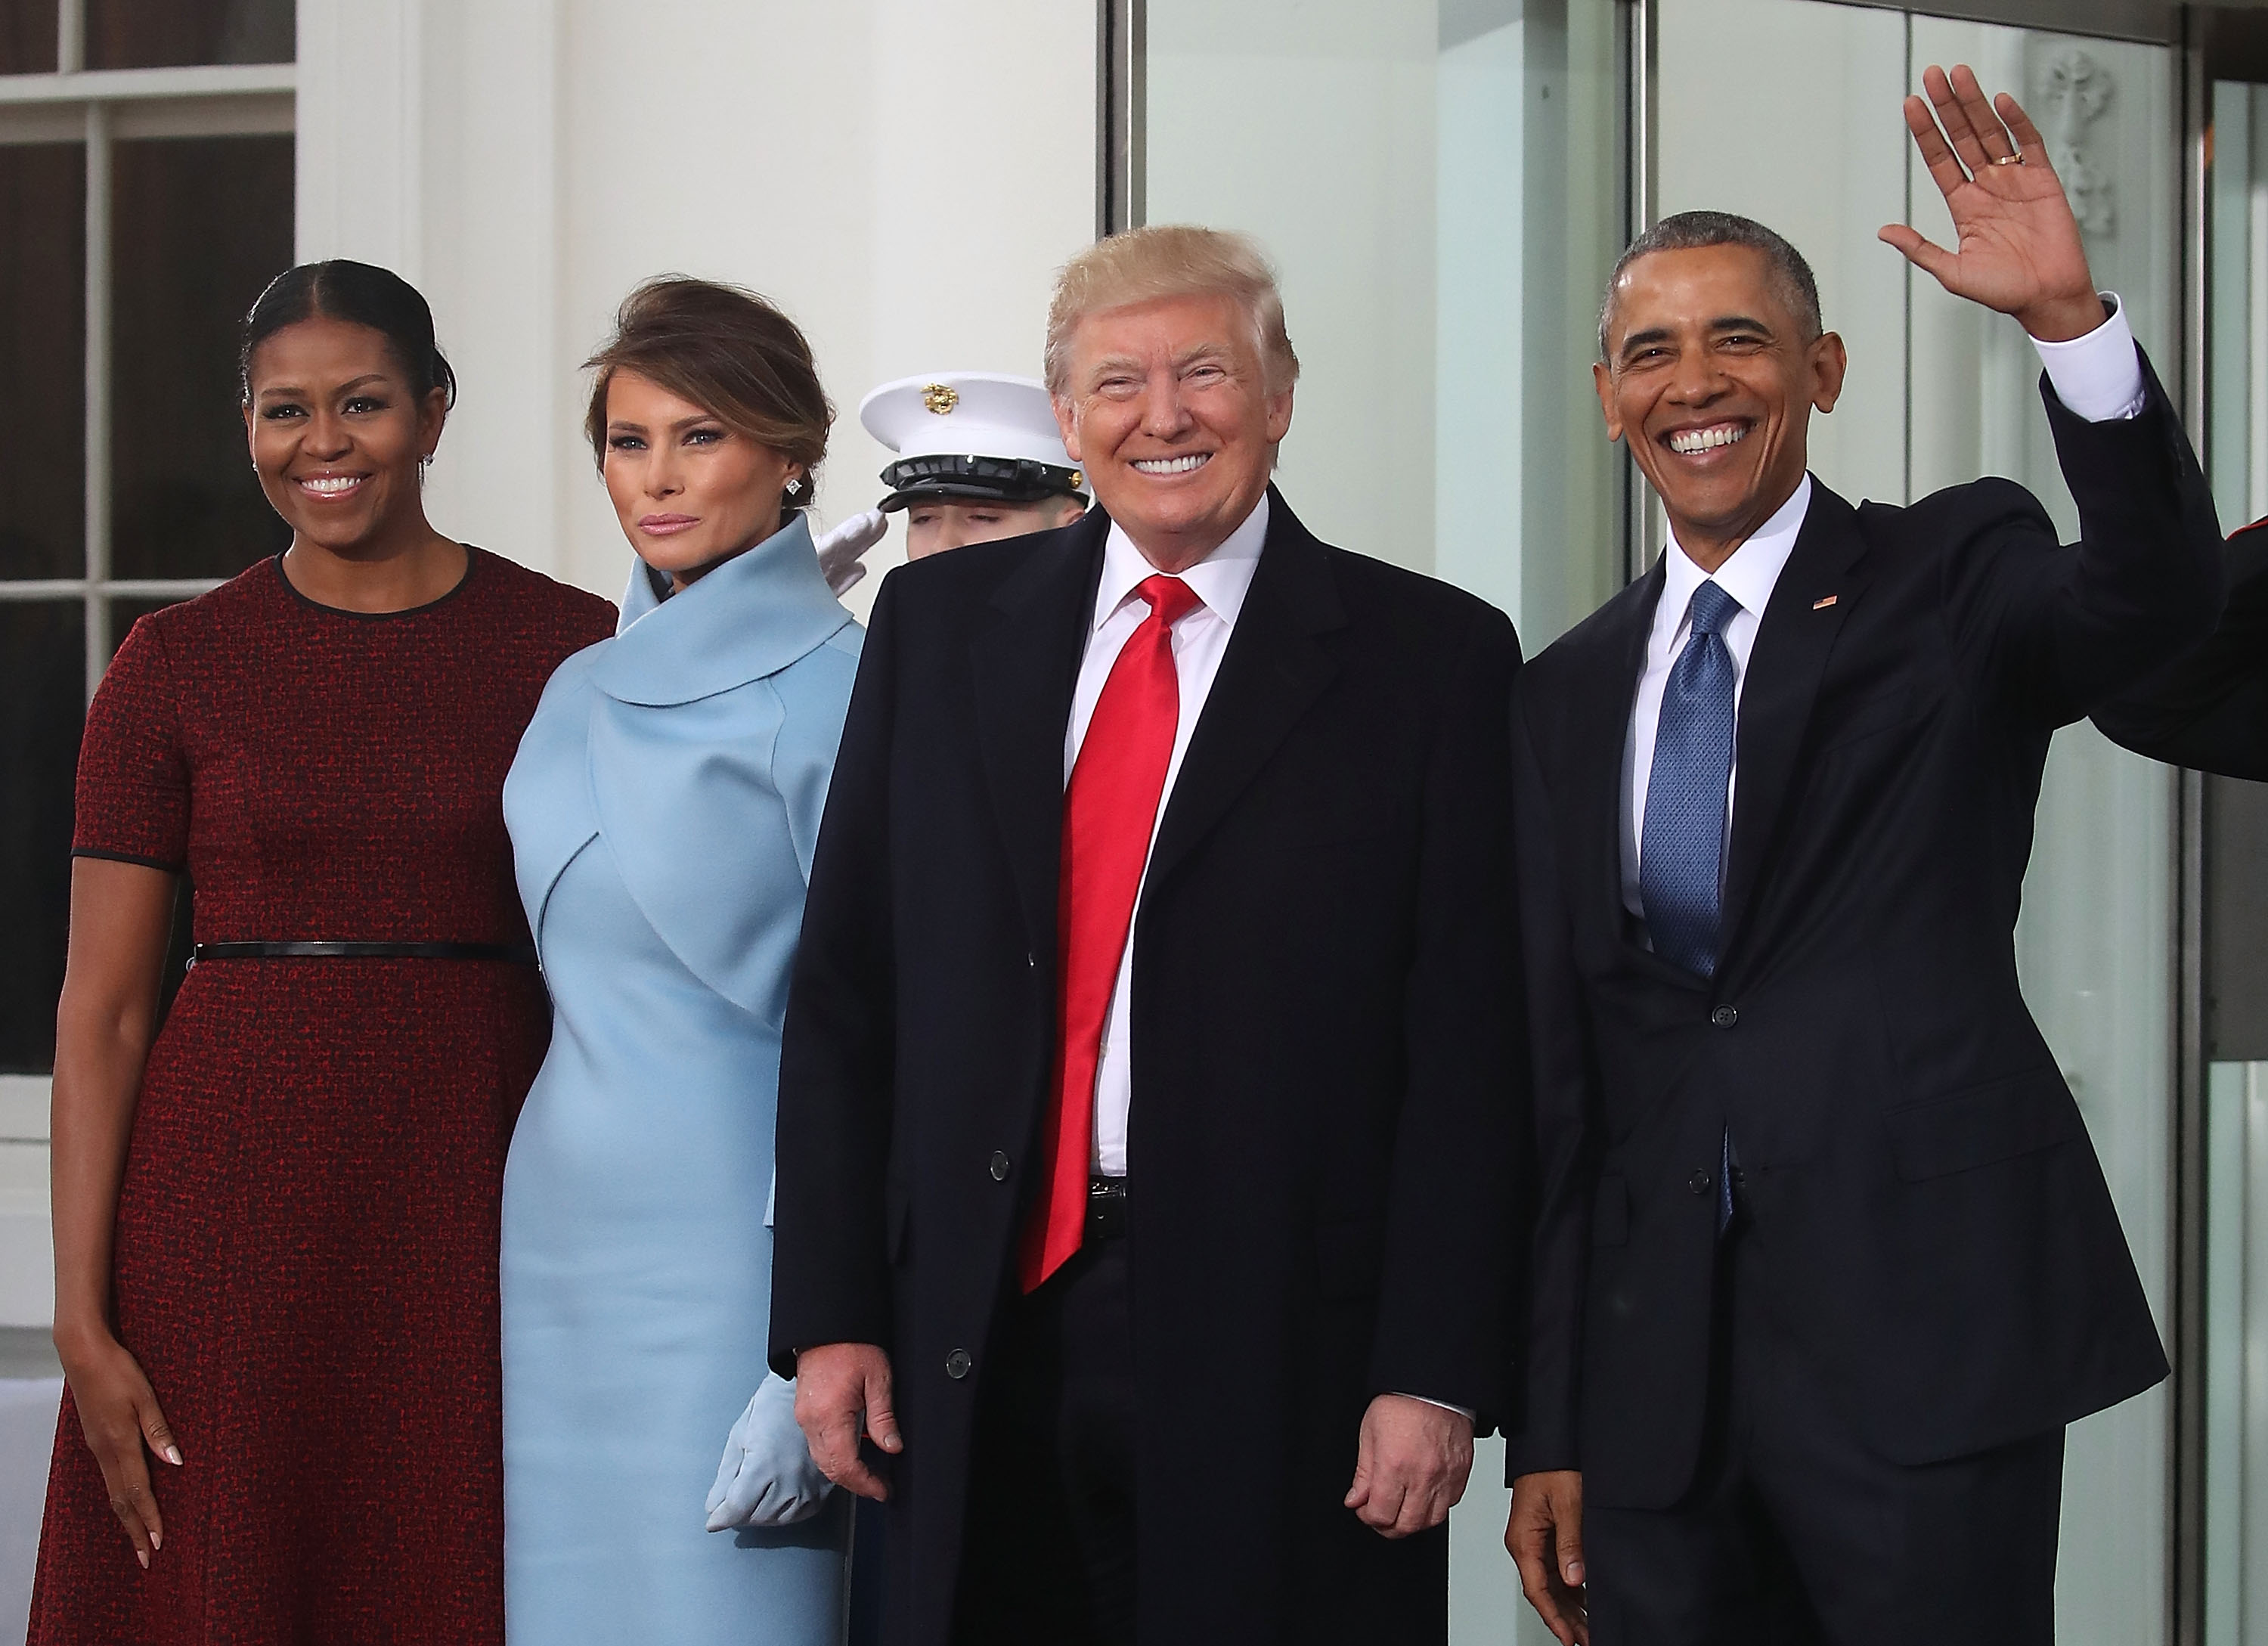 The Obamas and Trumps.